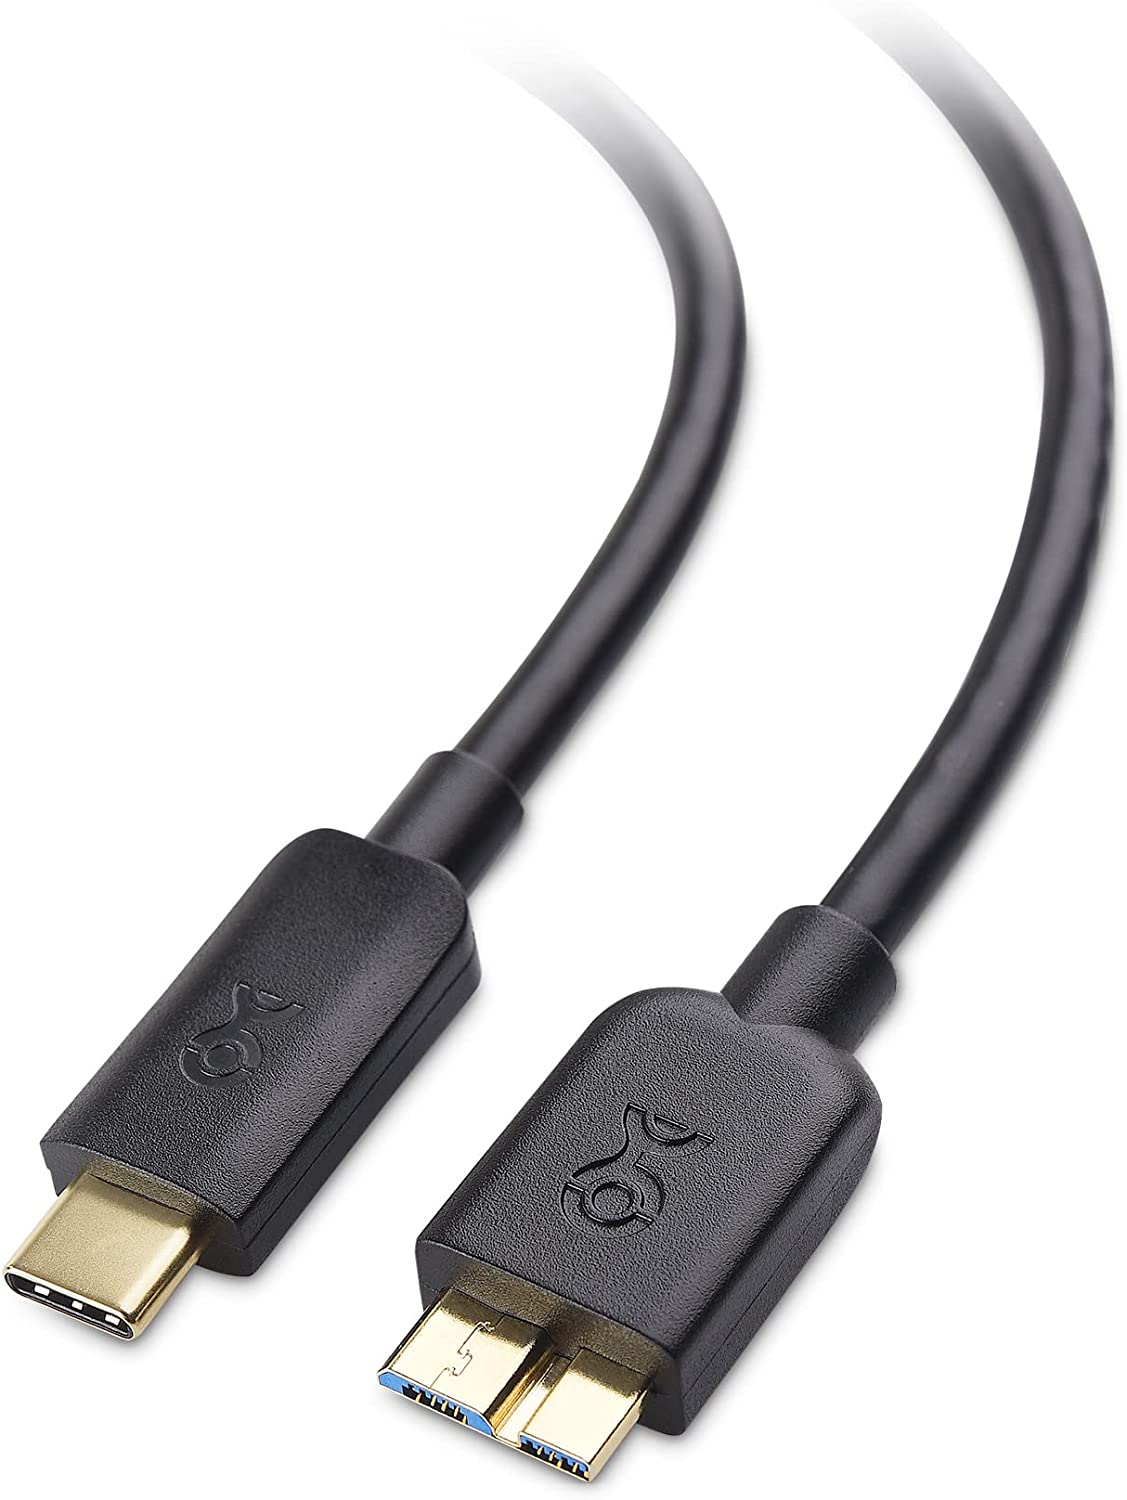 Cable Matters USB C to Micro USB 3.0 Cable (USB C to Micro B 3.0, USB C Hard Drive Cable) in Black 3.3 Feet - image 1 of 7